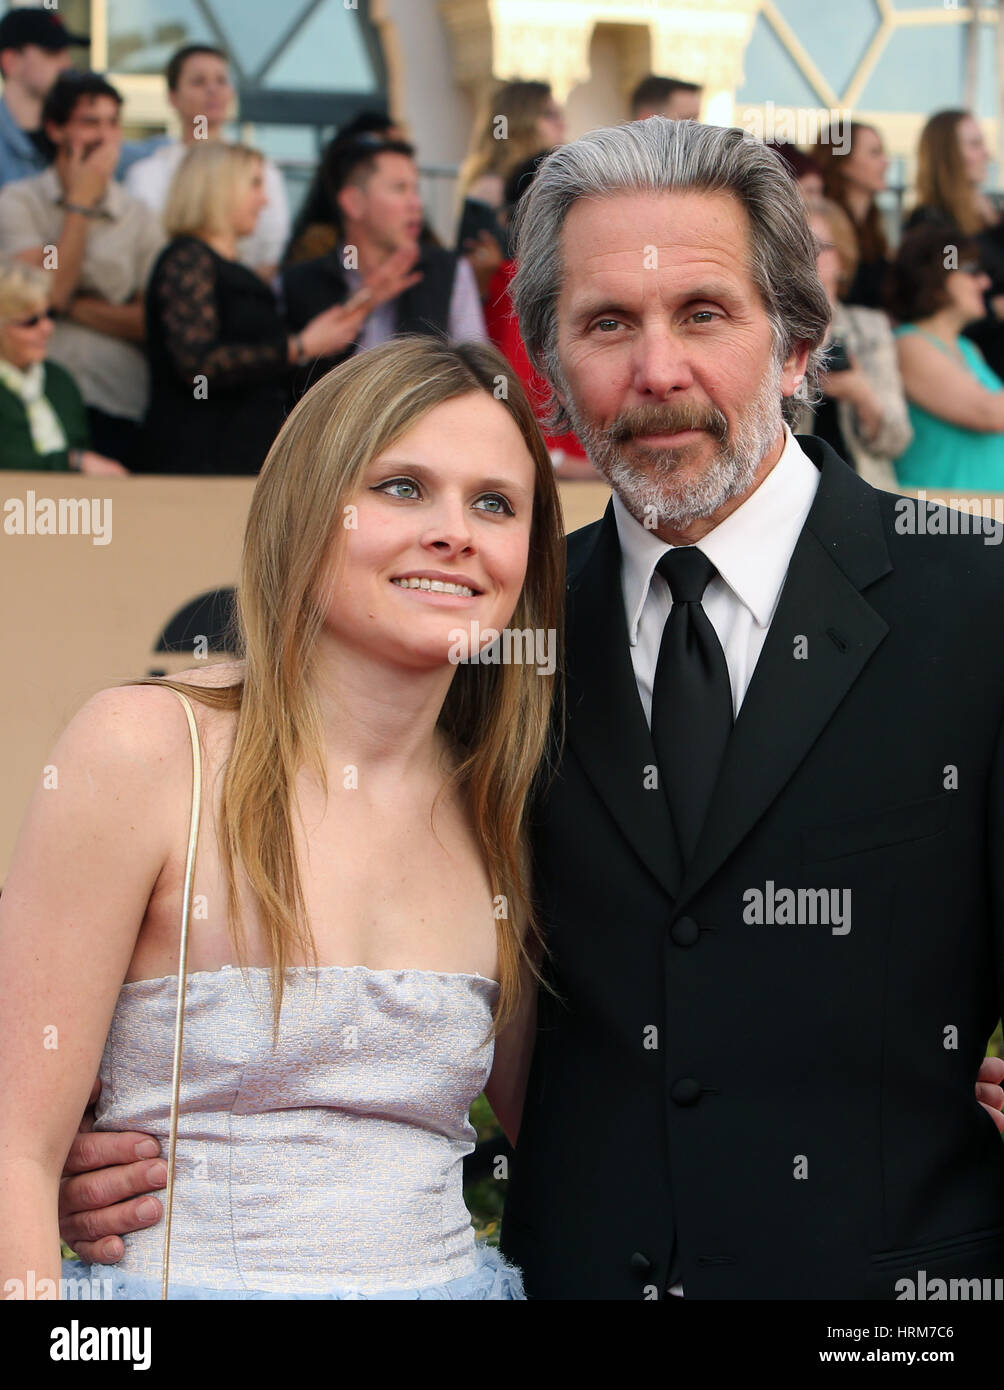 23rd Annual Screen Actors Guild Awards - Arrivals  Featuring: Mary Cole, Gary Cole Where: Los Angeles, California, United States When: 29 Jan 2017 Stock Photo